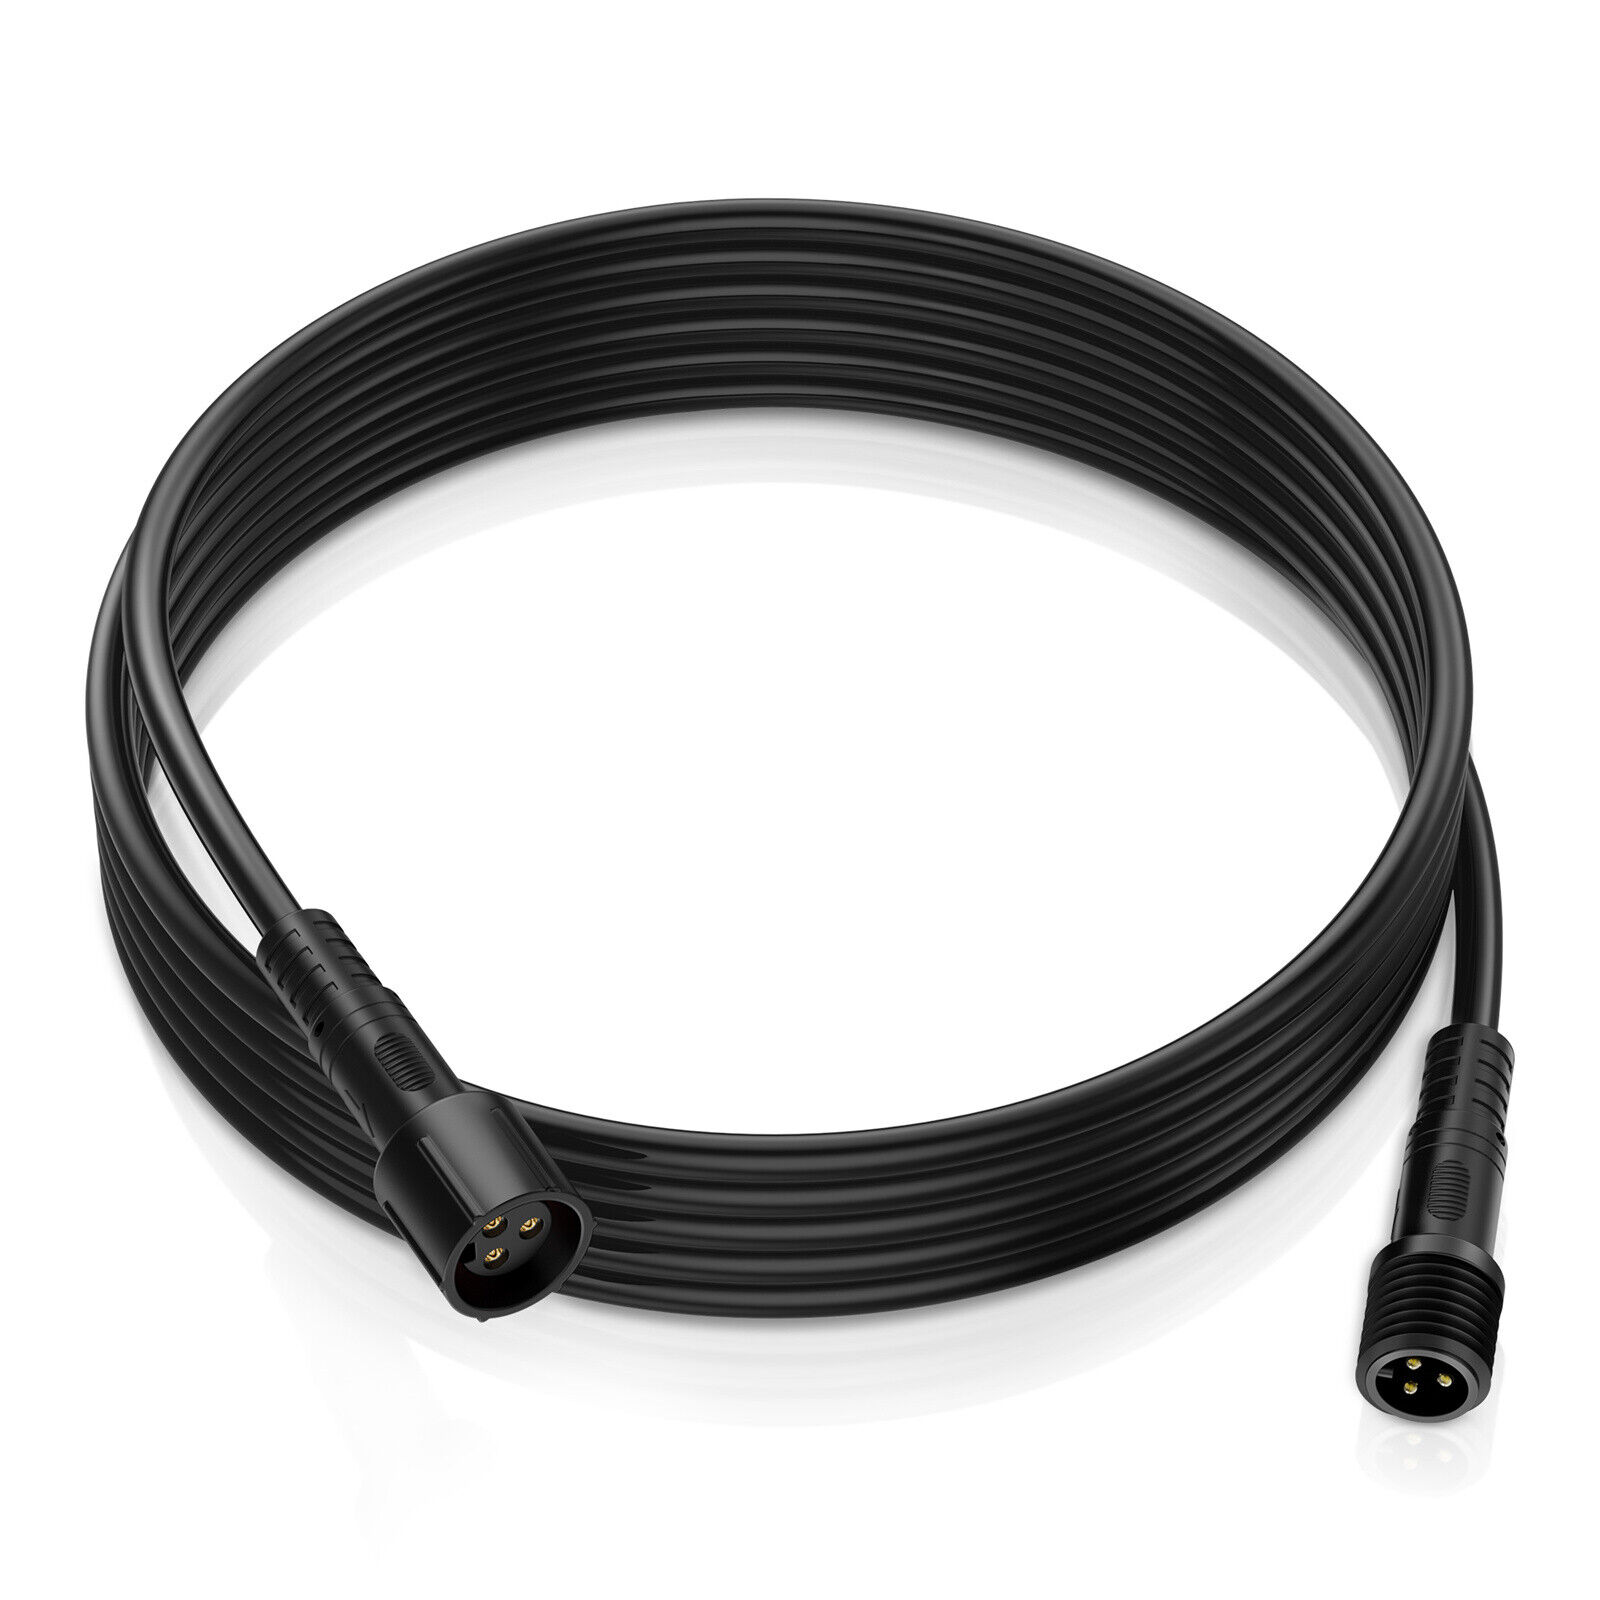 MICTUNING 10FT 3Pin Extension Wire Cable Cord for C2 RGB Lights/P1s Switch Panel